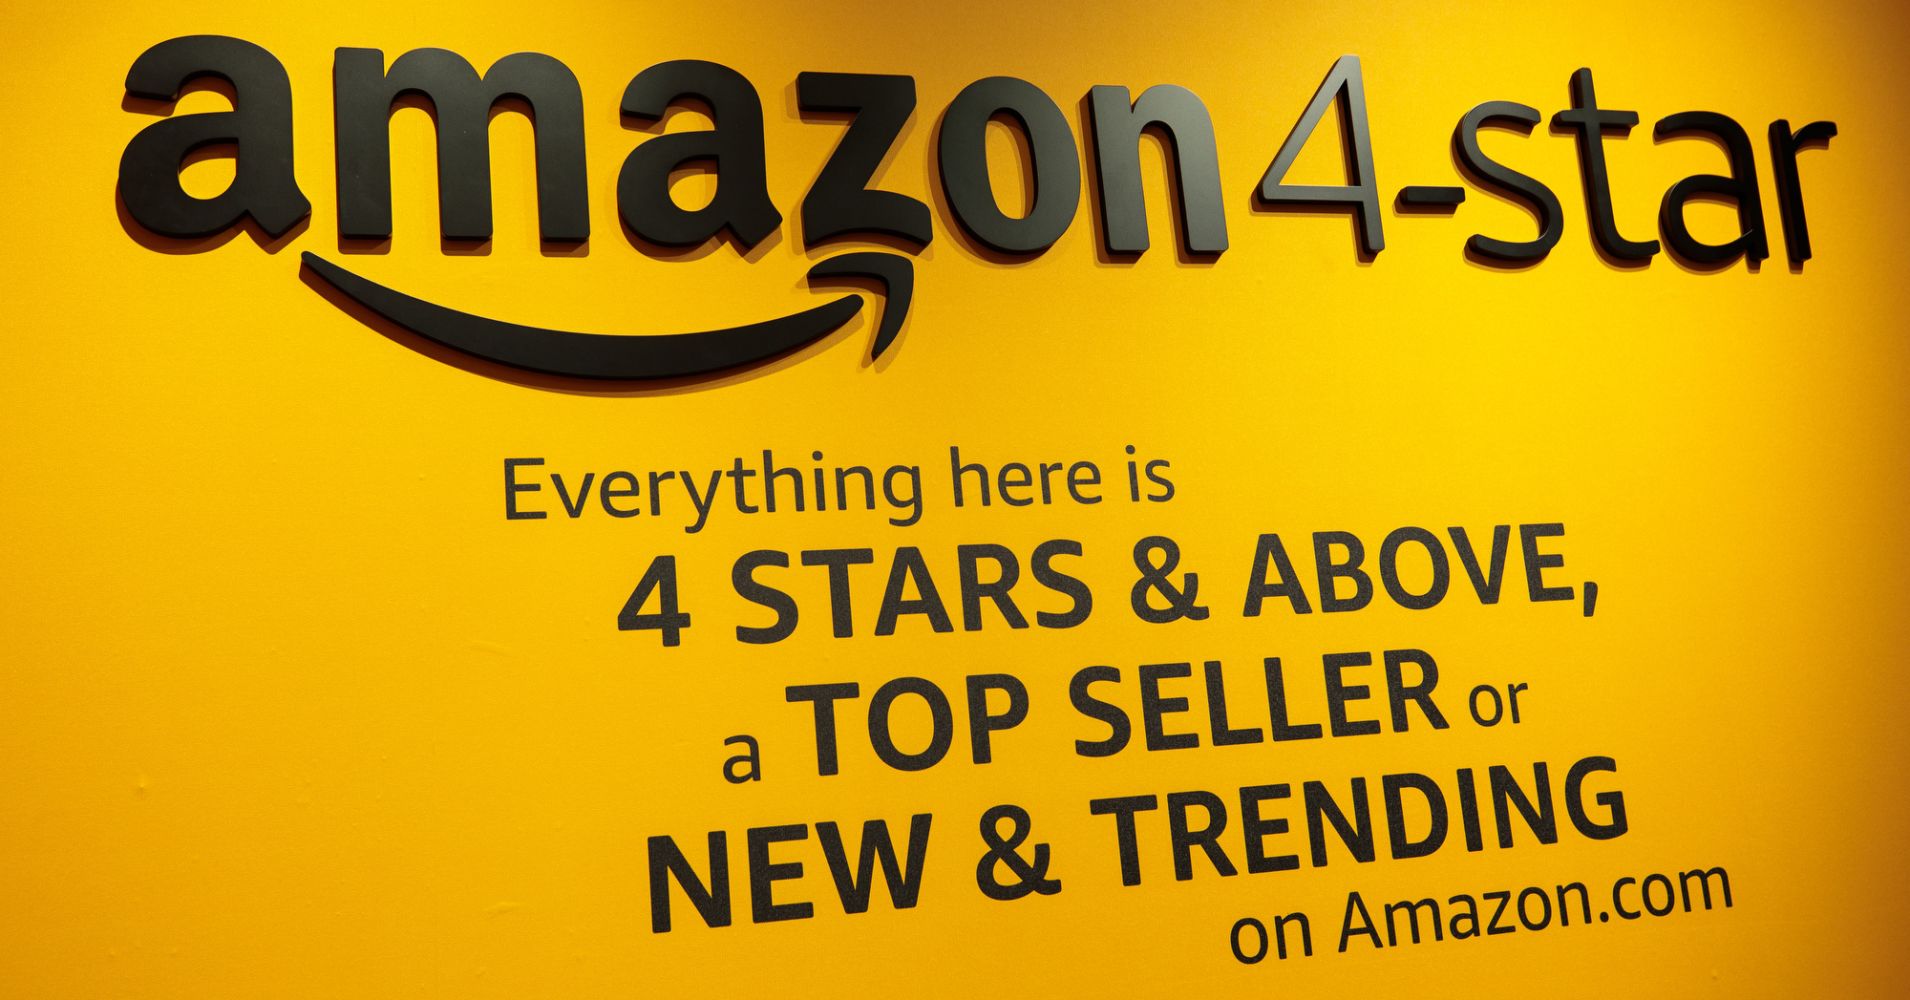 Amazon 4-Star In Nyc – Top Selling Products At Store